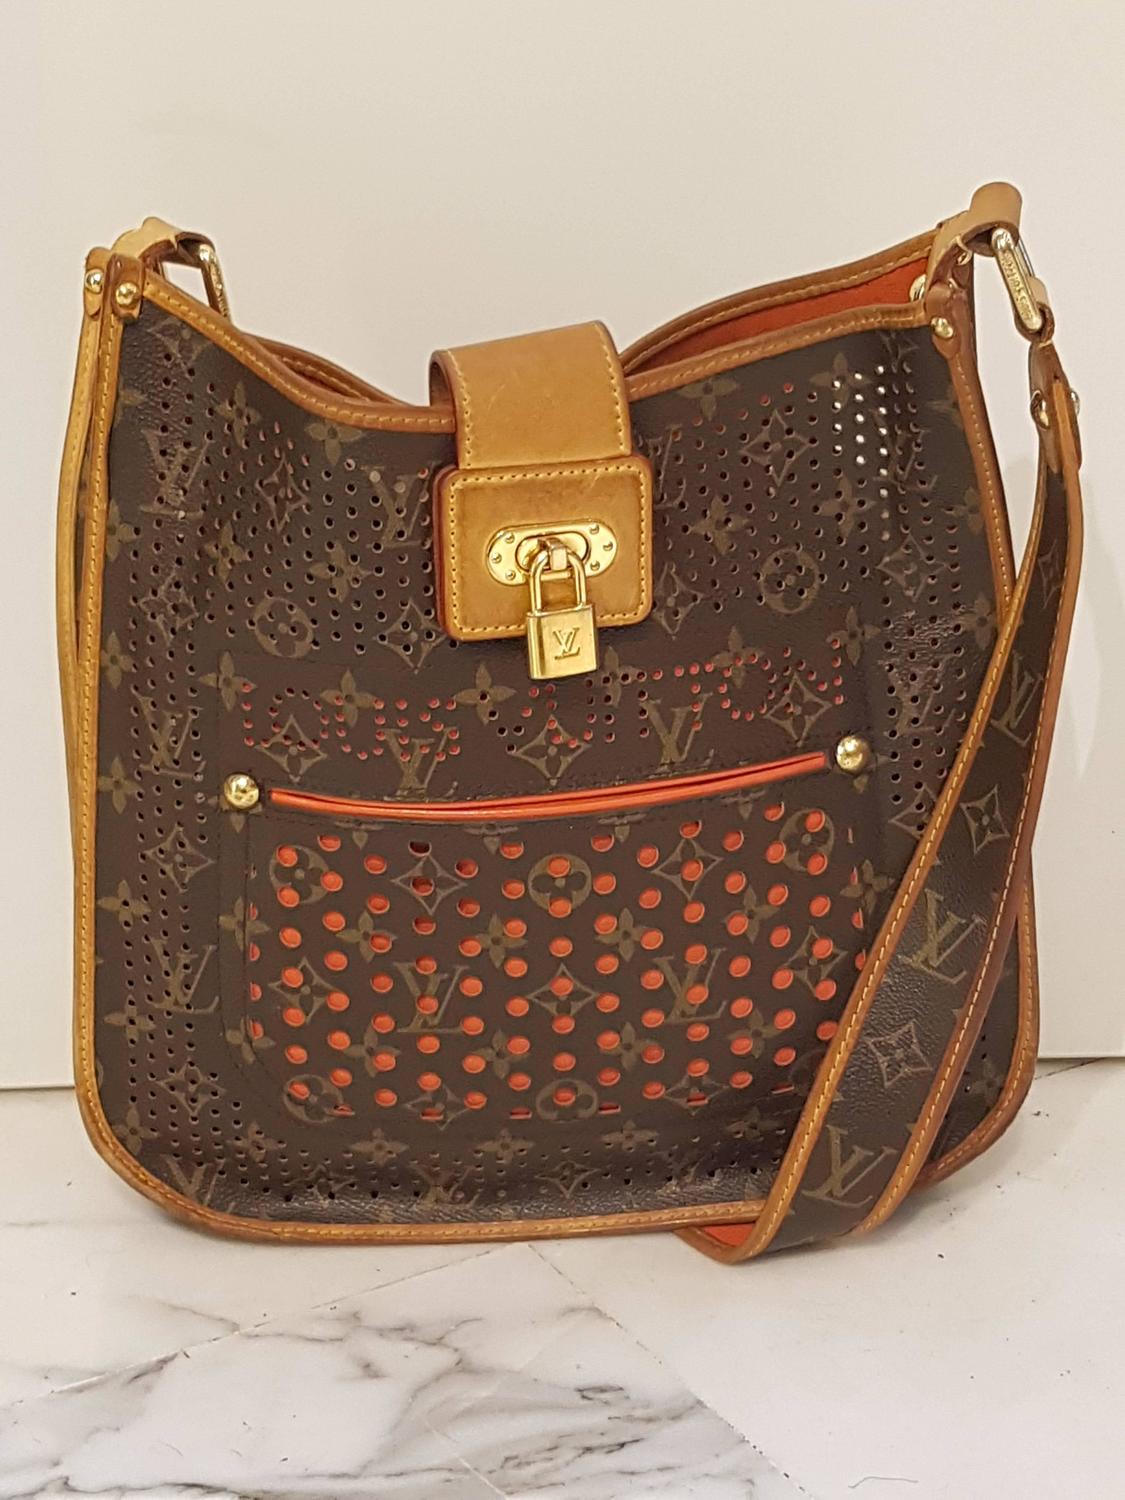 2006 Louis Vuitton Musette Perforated Bag For Sale at 1stdibs